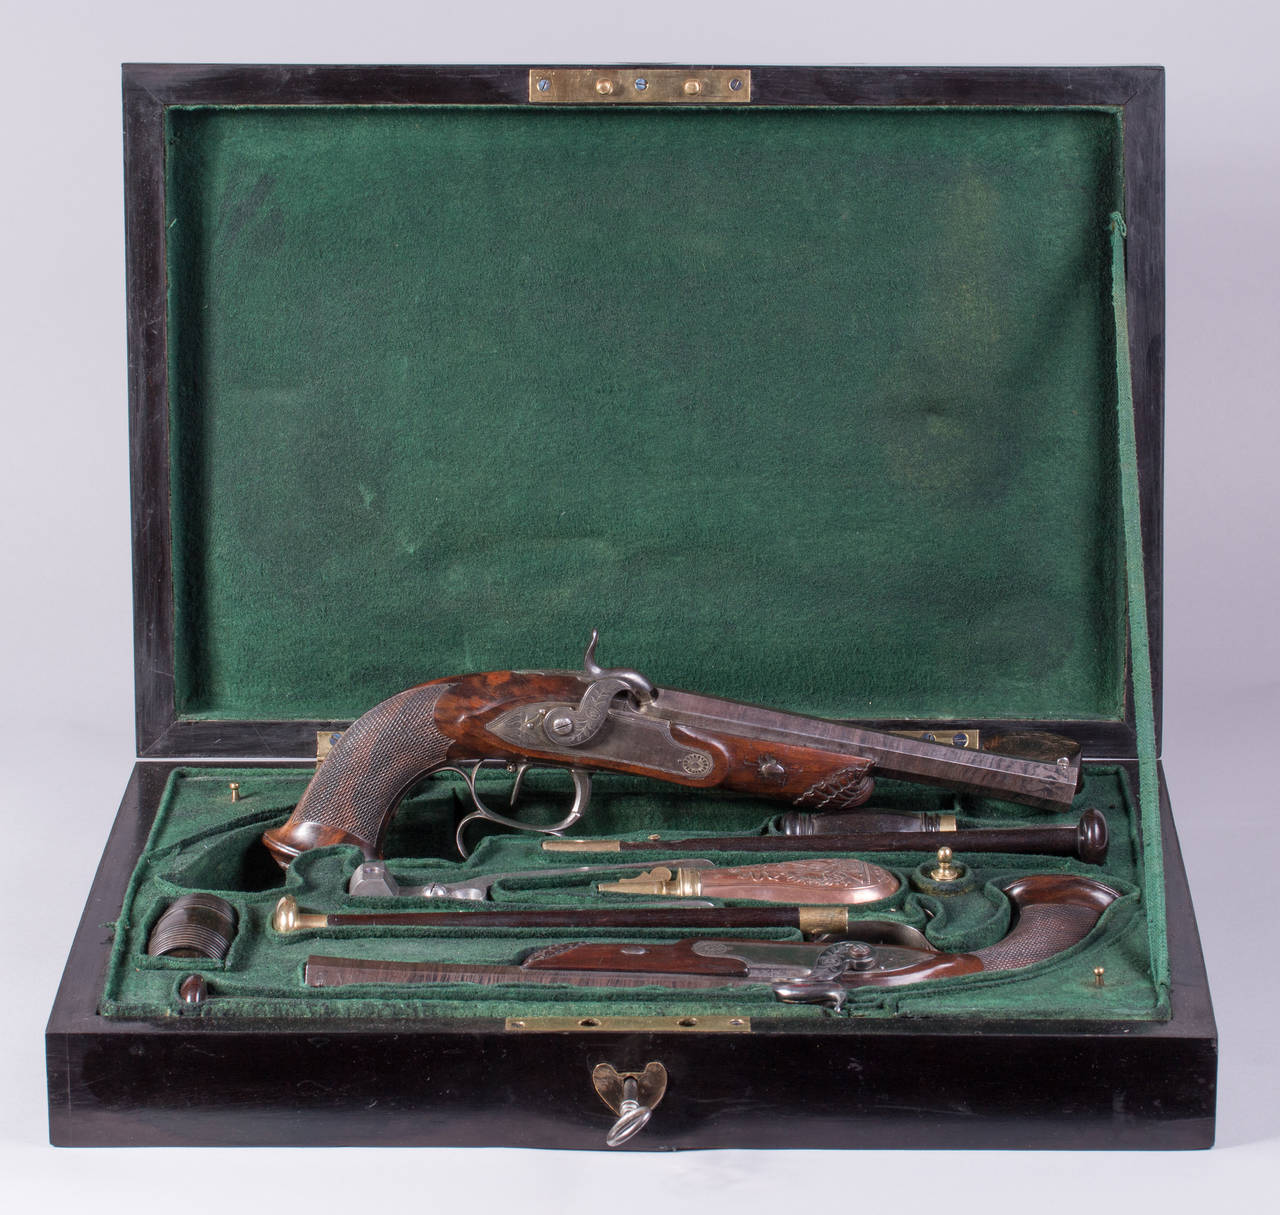 Belgium, circa 1850
Length of pistols: each ca. 36 cm, 14 mm caliber
Measure of case: 48 x 33 x 10 cm
Smooth barrels, engraved iron fittings, walnut wood shafts with carvings, ebonized wooden box with accessories.